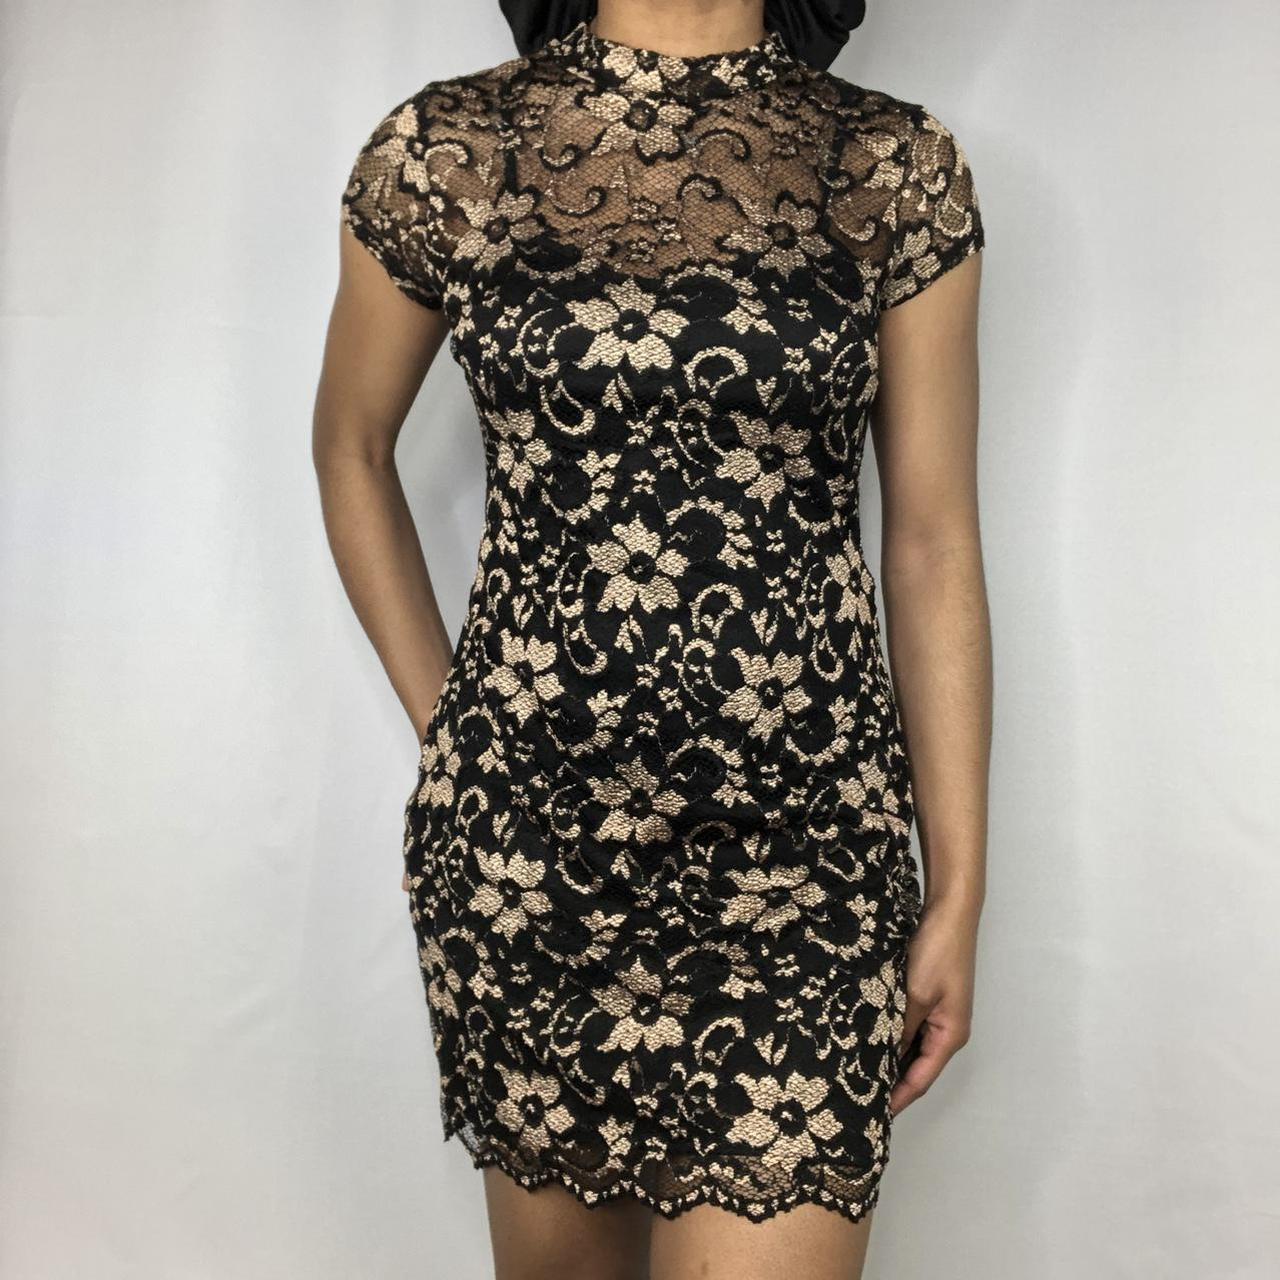 Product Image 3 - Gold embroidered dress

Black short sleeve